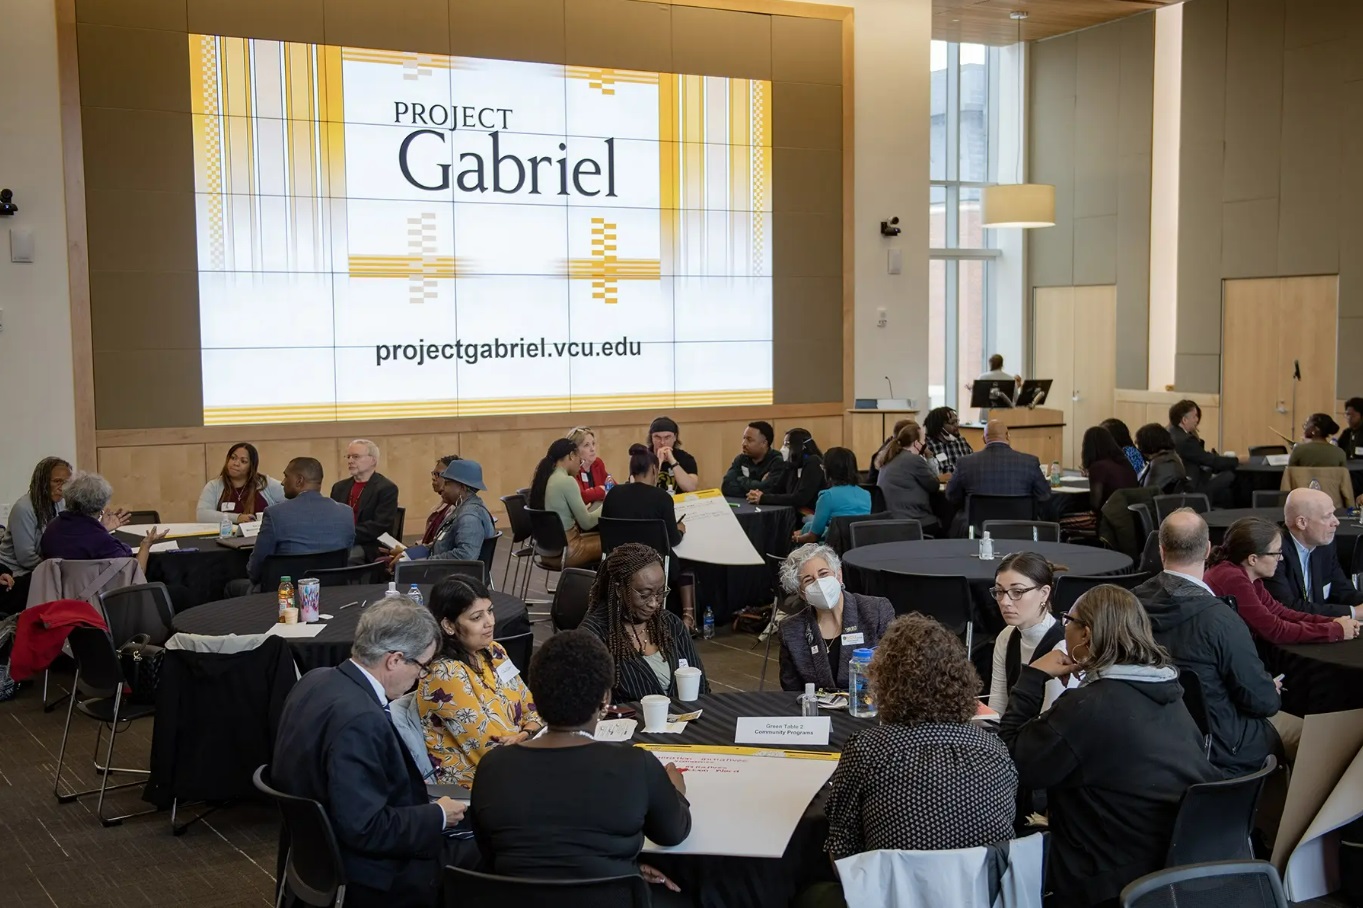 Community provides valuable feedback, ideas to VCU’s Project Gabriel